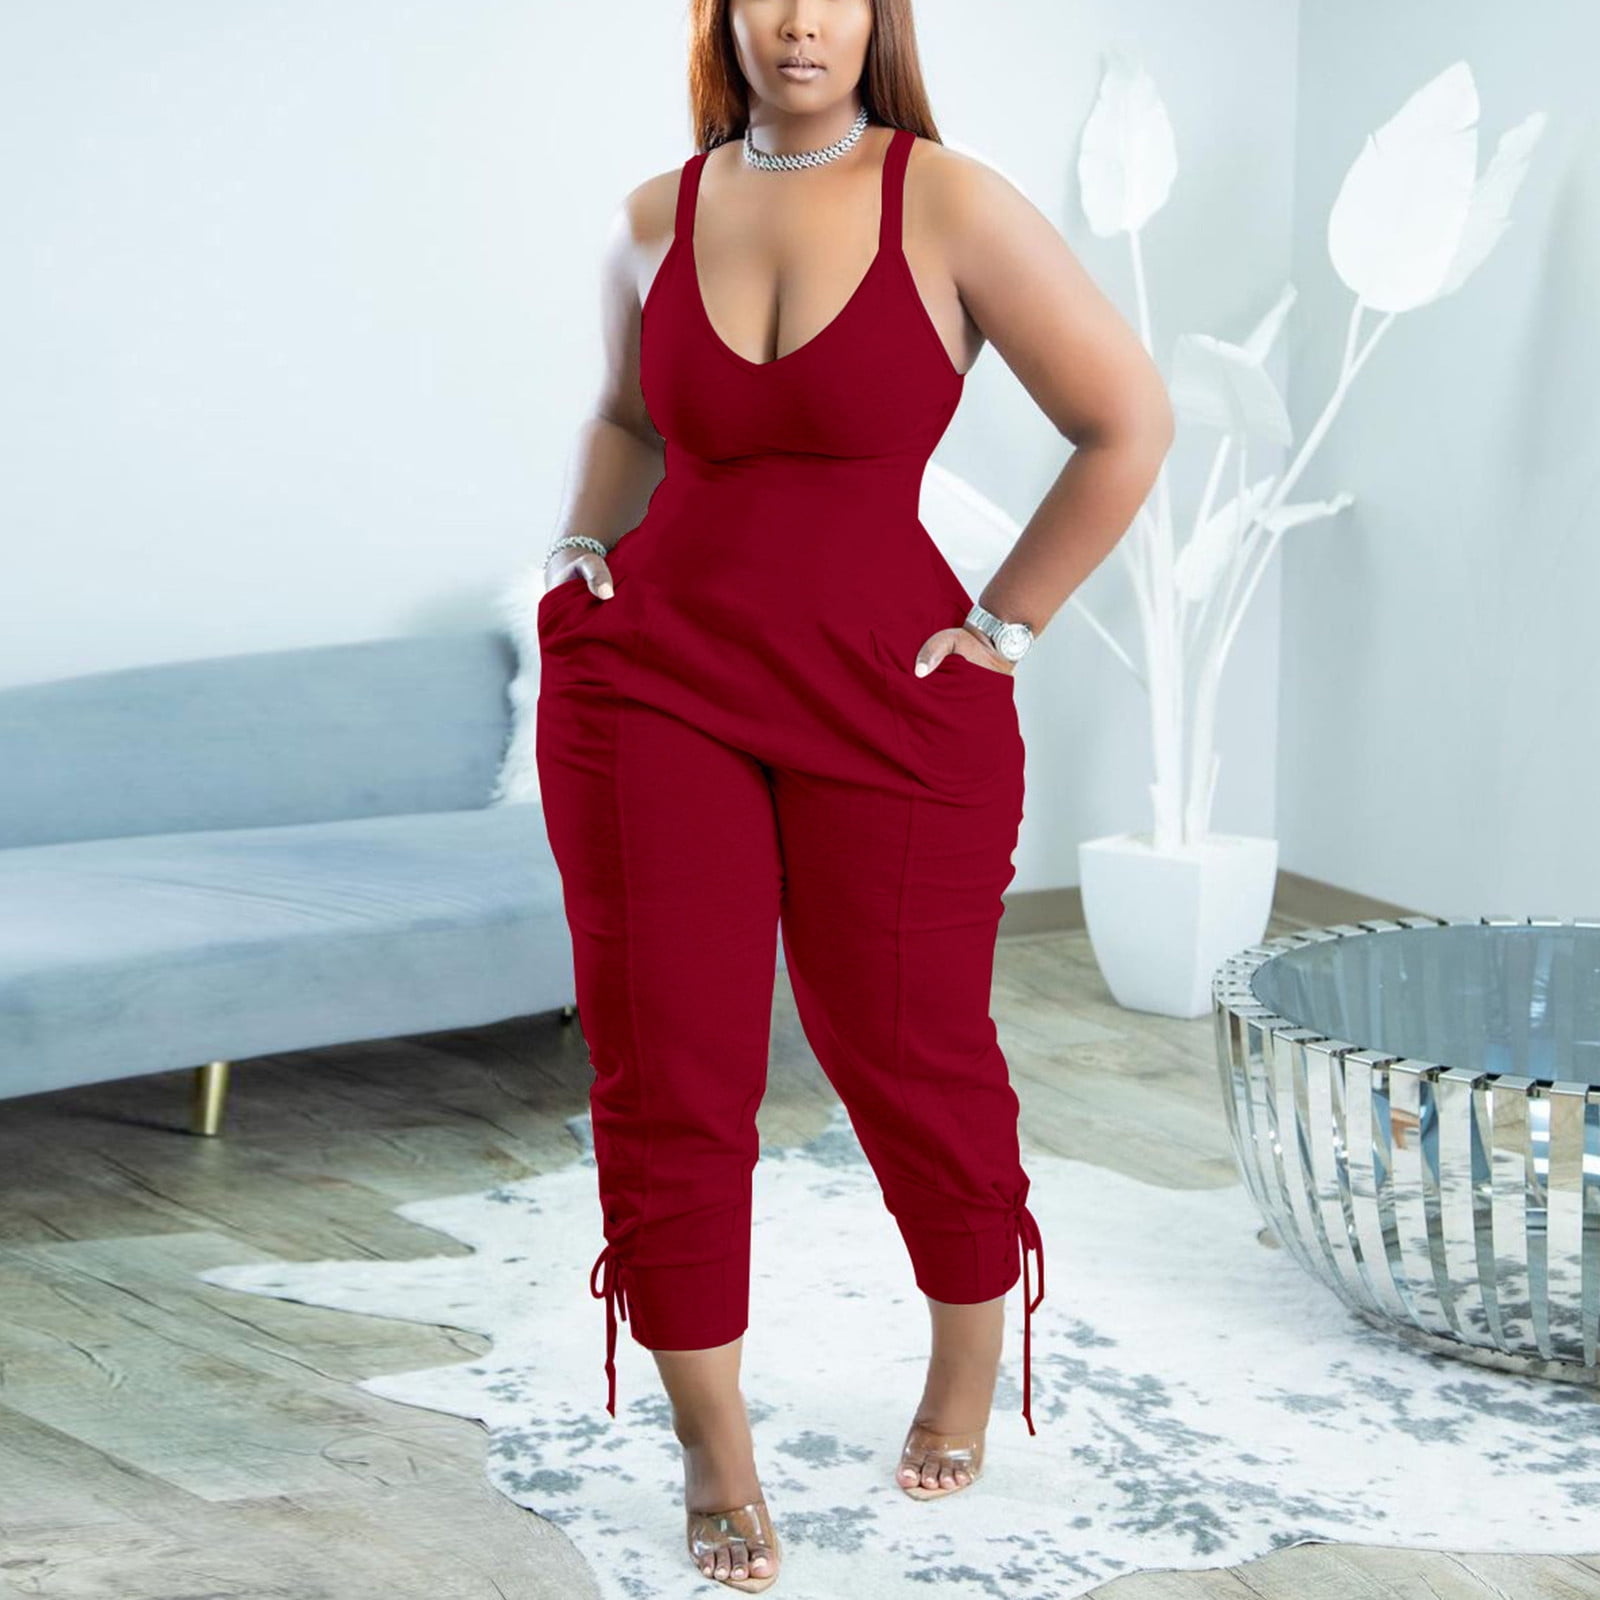 Aueoeo Plus Size Jumpsuits for Women Dressy, Women's Sexy